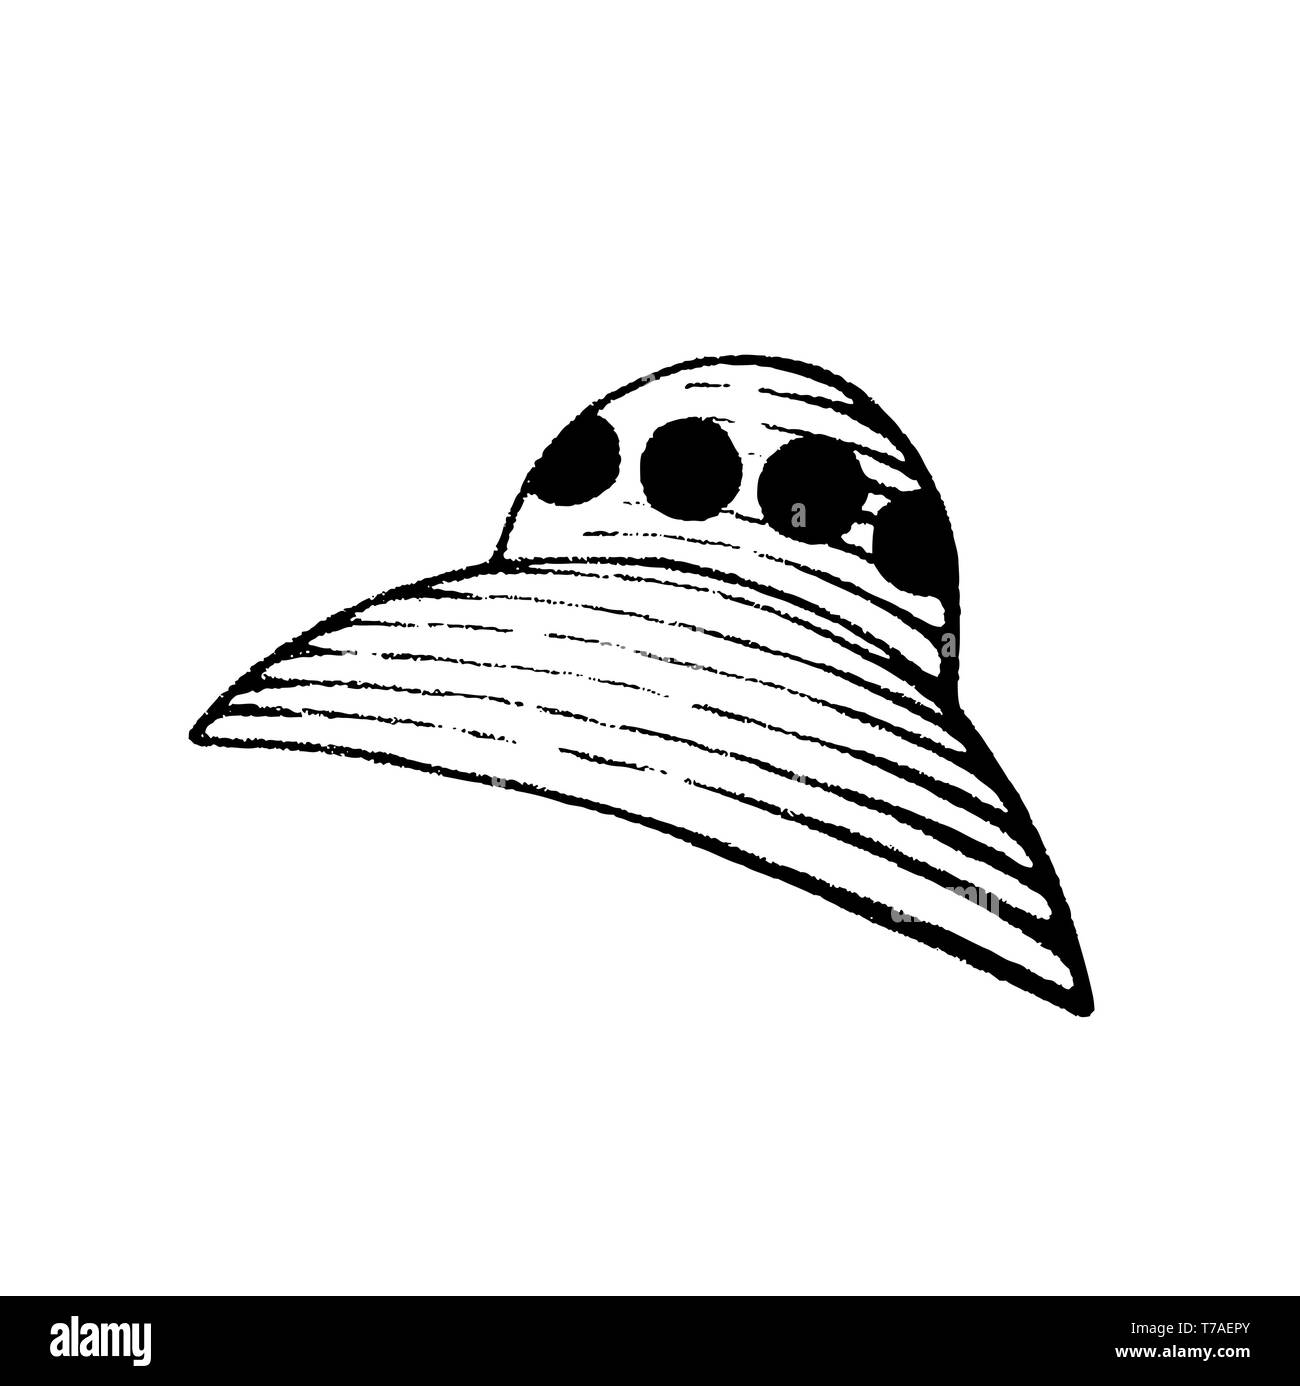 Vector Illustration of a Scratchboard Style Ink Drawing of an Alien  Spaceship Stock Photo - Alamy